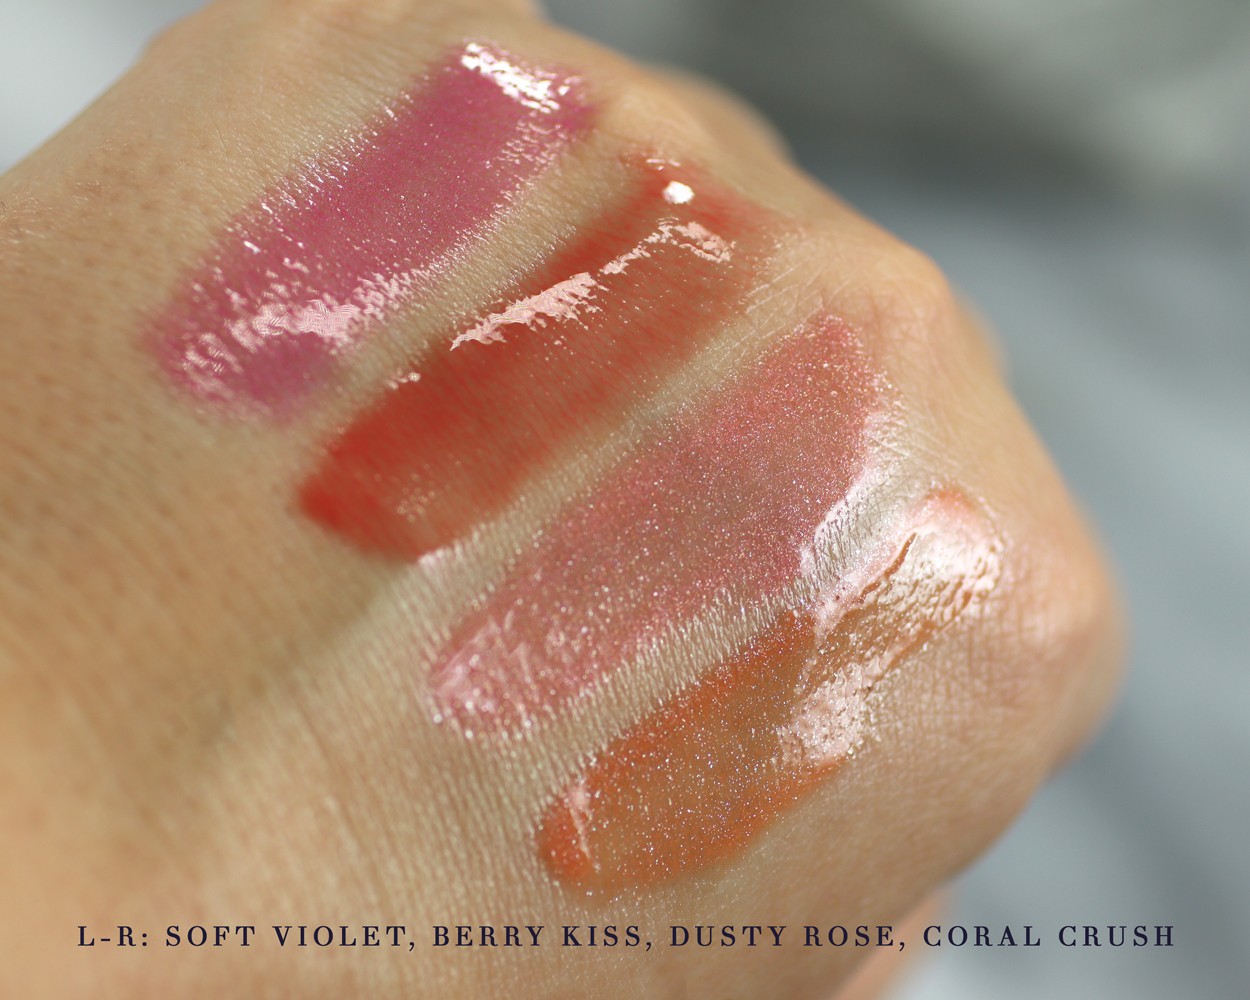 Azelique Lip Gloss Swatches - Review of Azelique Cosmetics by Los Angeles cruelty free beauty blogger My Beauty Bunny